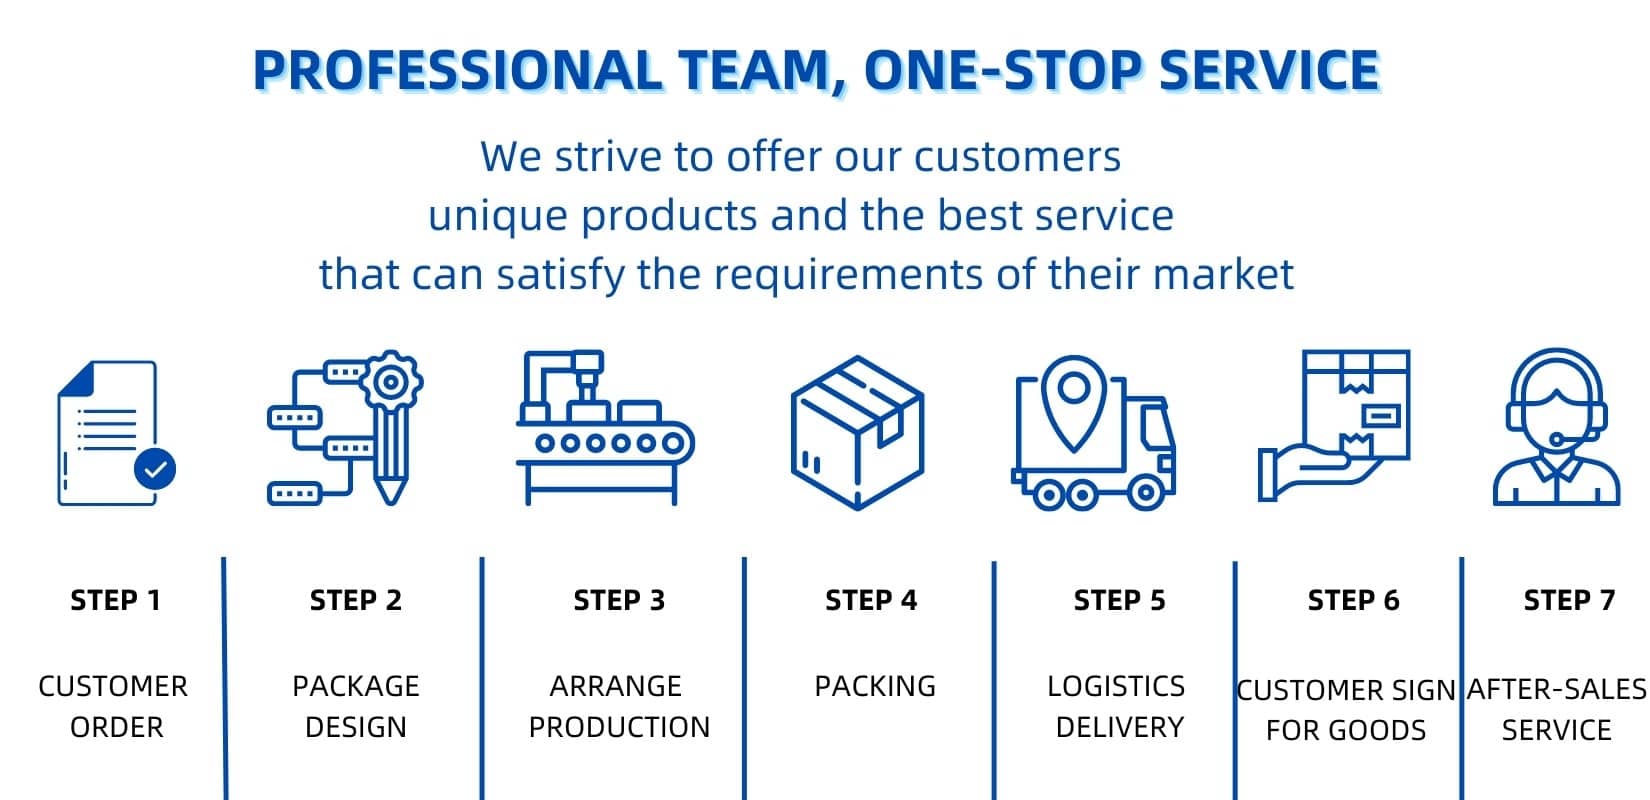 PROFESSIONAL TEAM, ONE STOP SERVICE